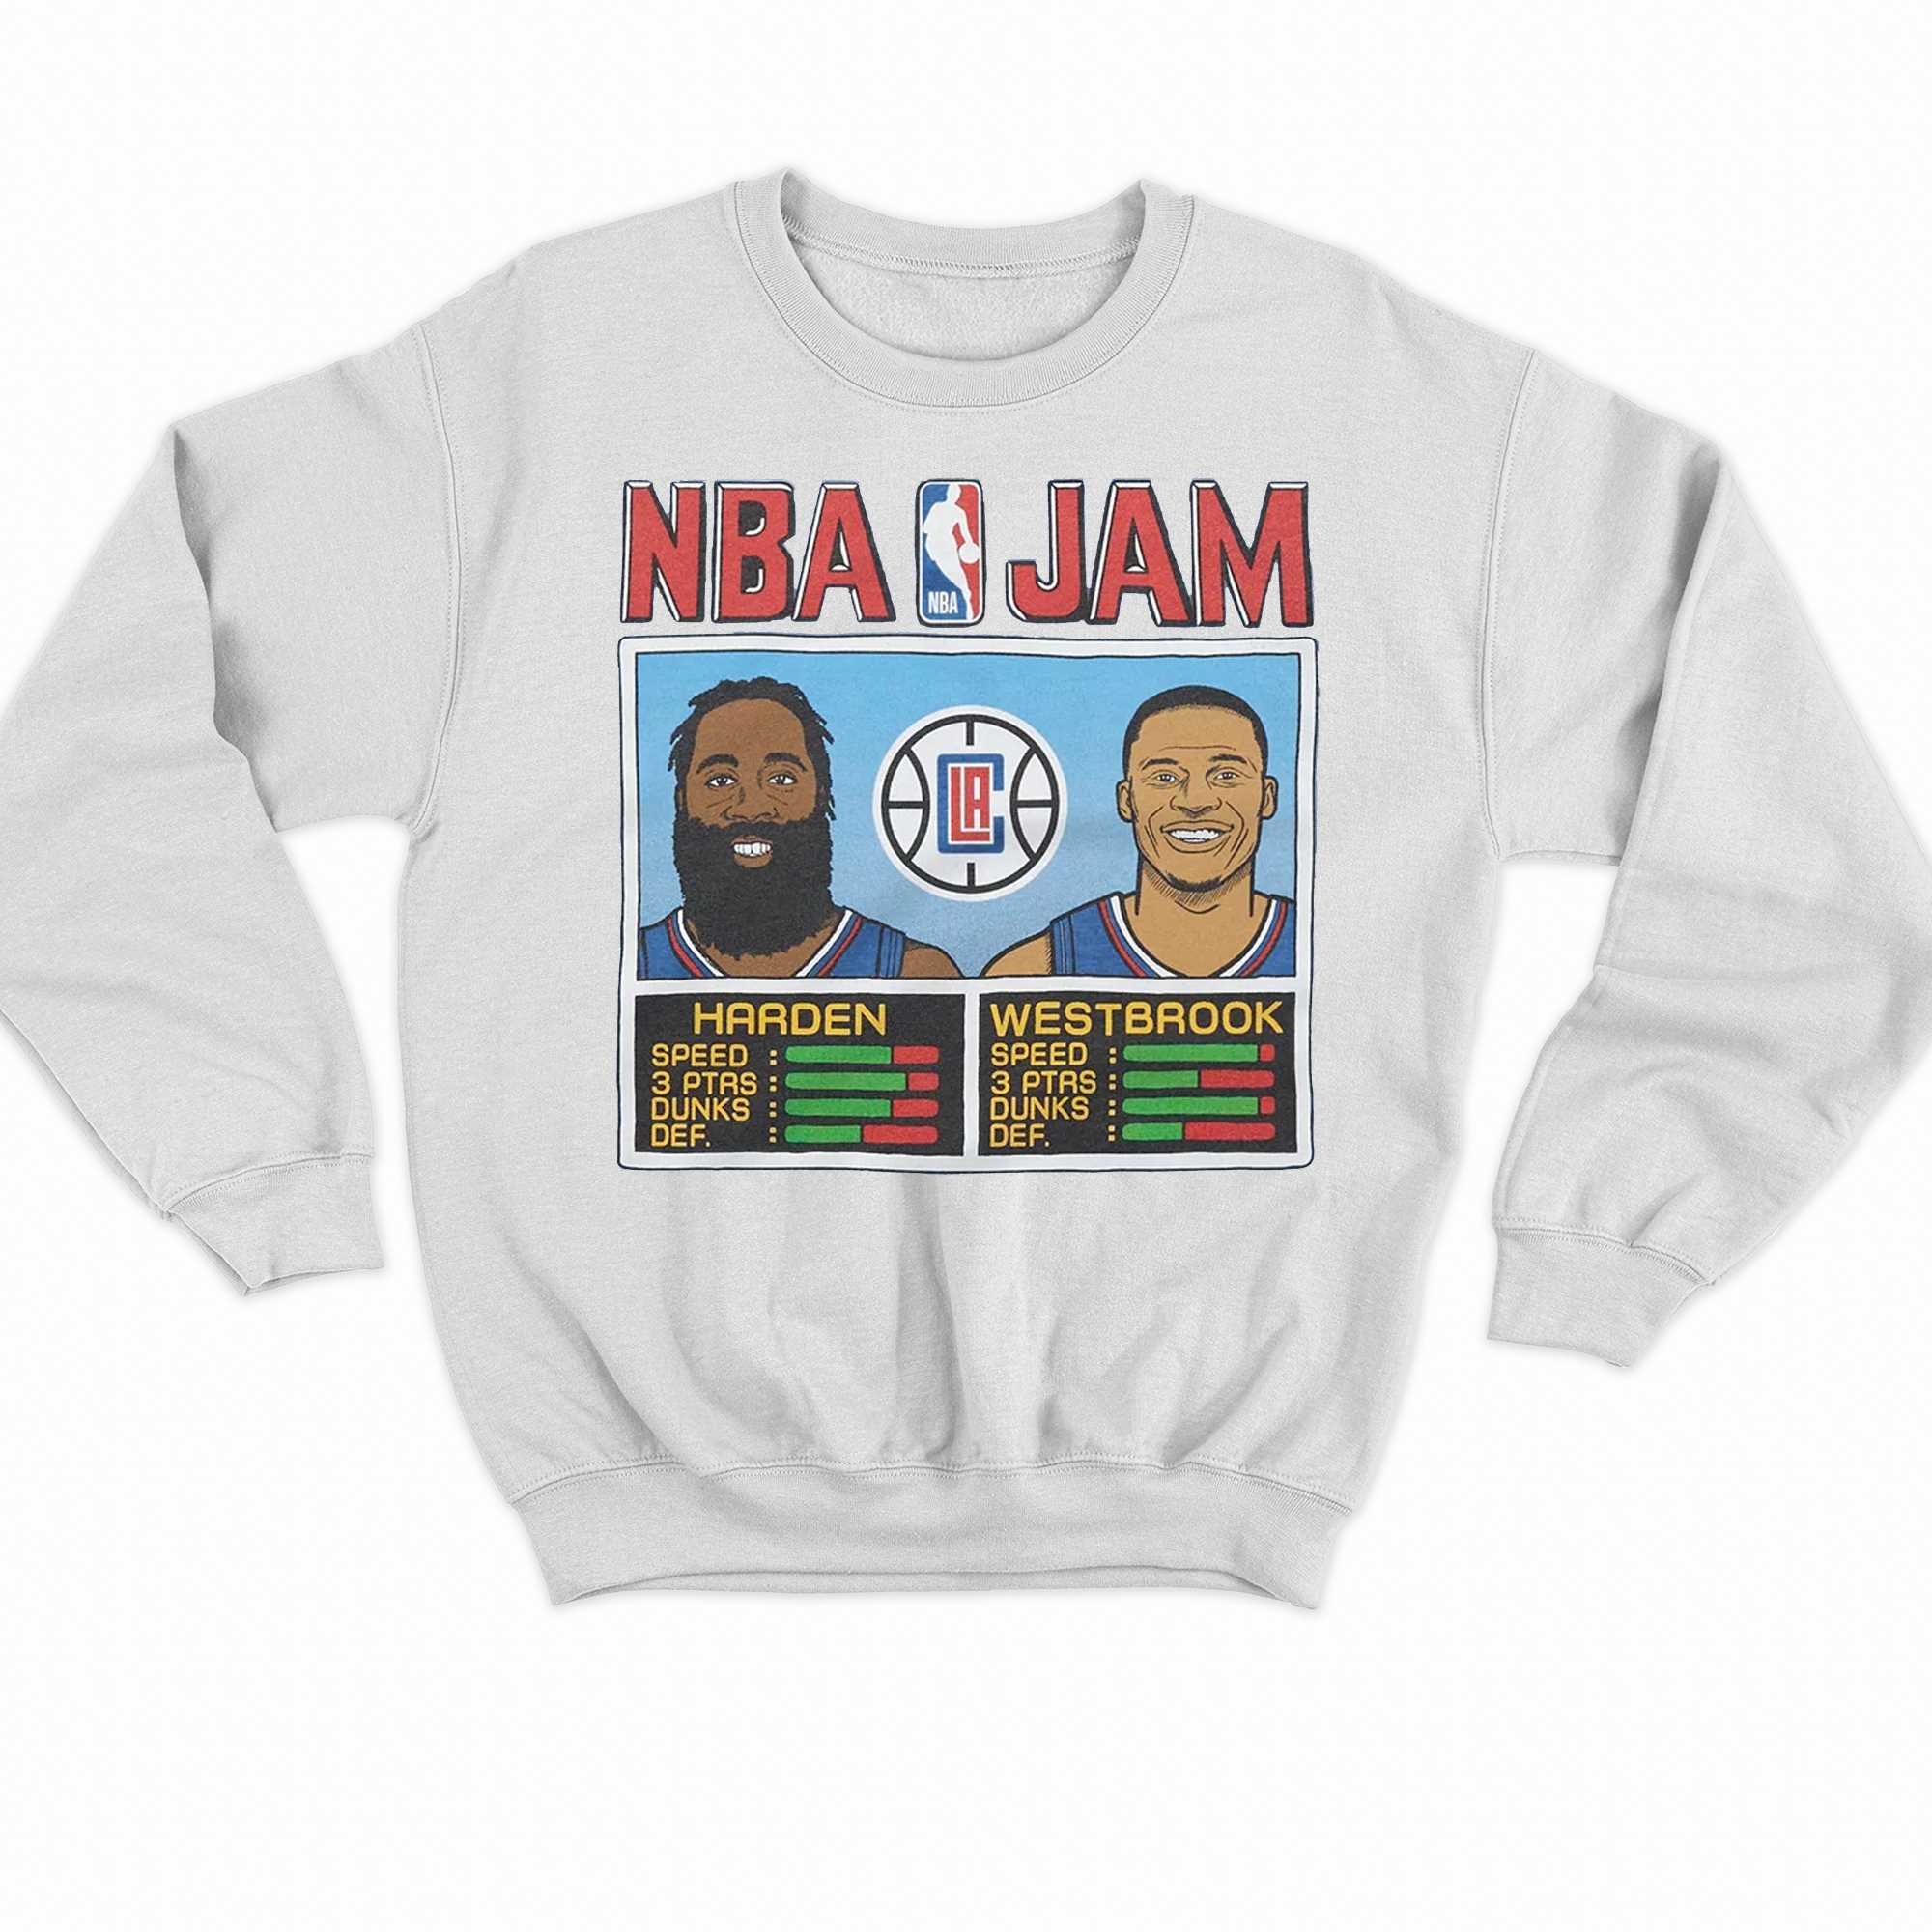 Nba Jam Clippers Harden And Westbrook Shirt 